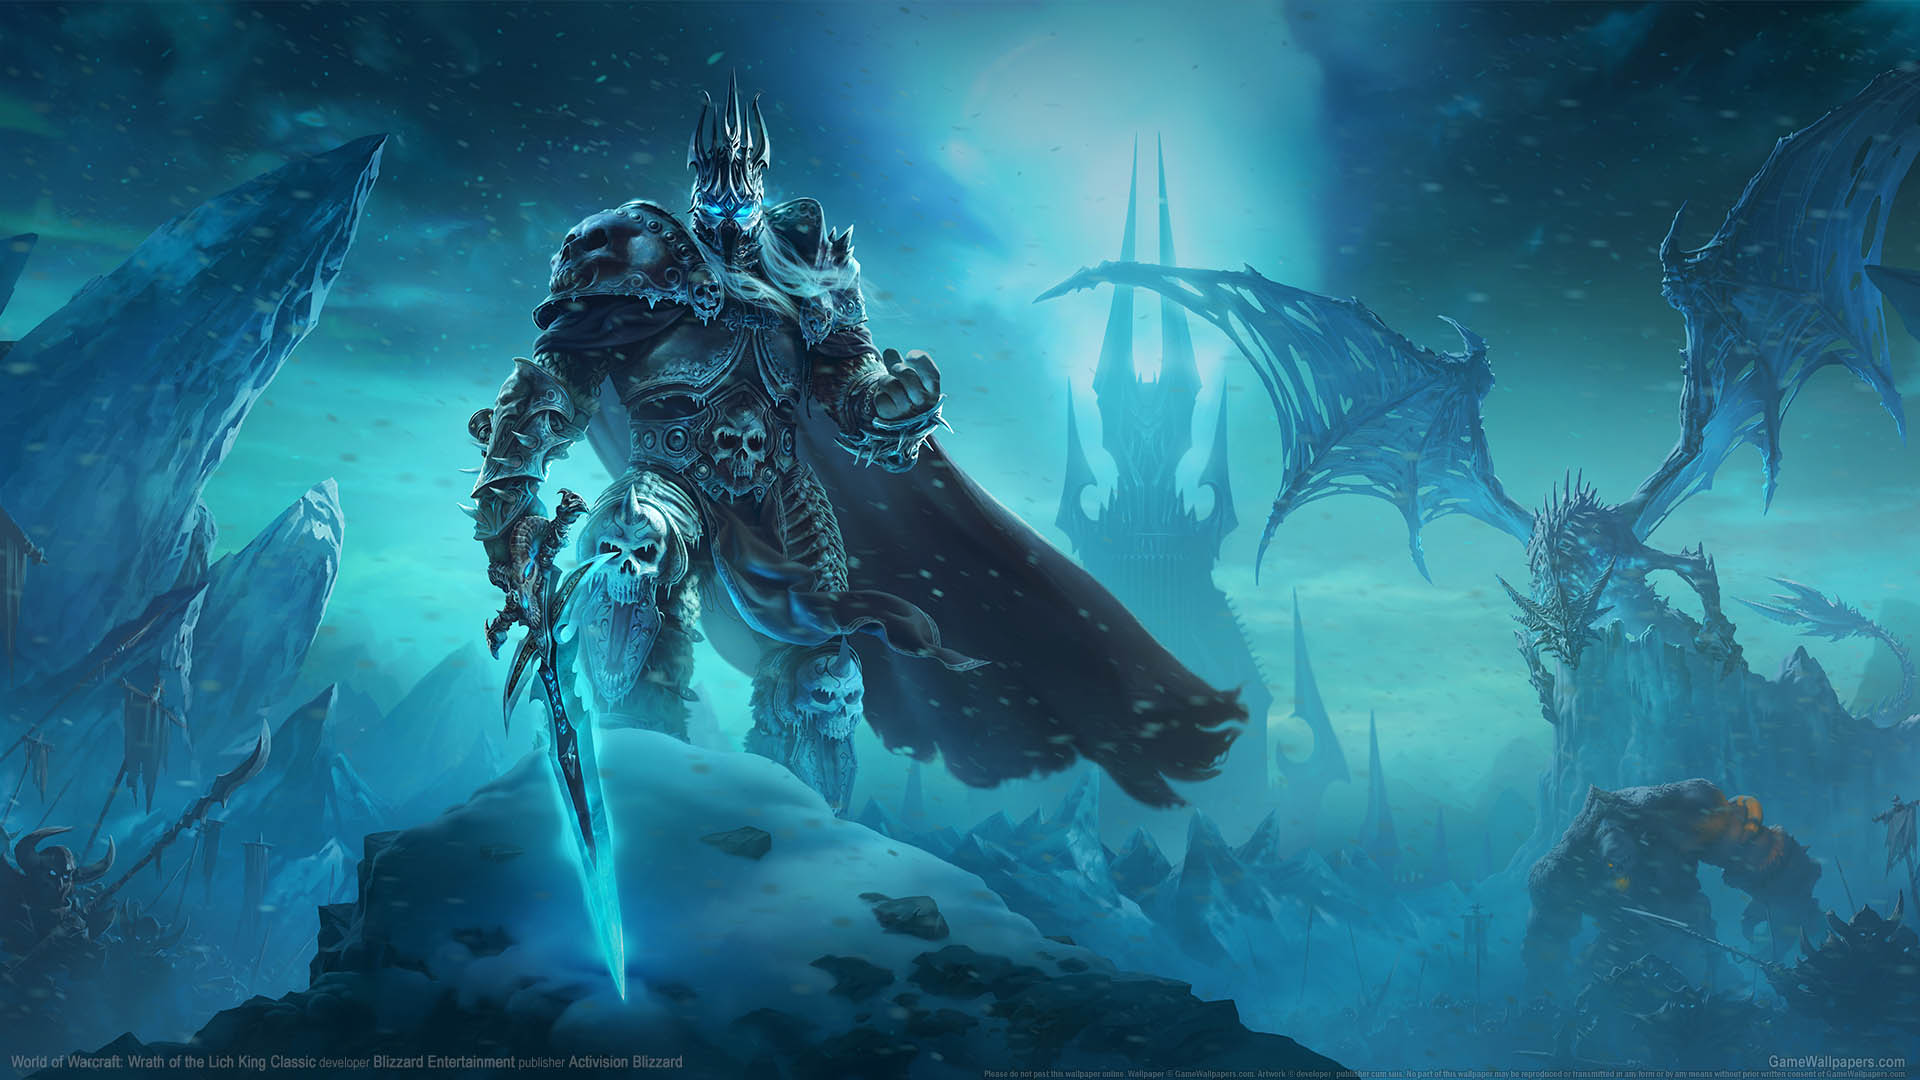 World of Warcraft: Wrath of the Lich King Classic wallpaper 01 1920x1080